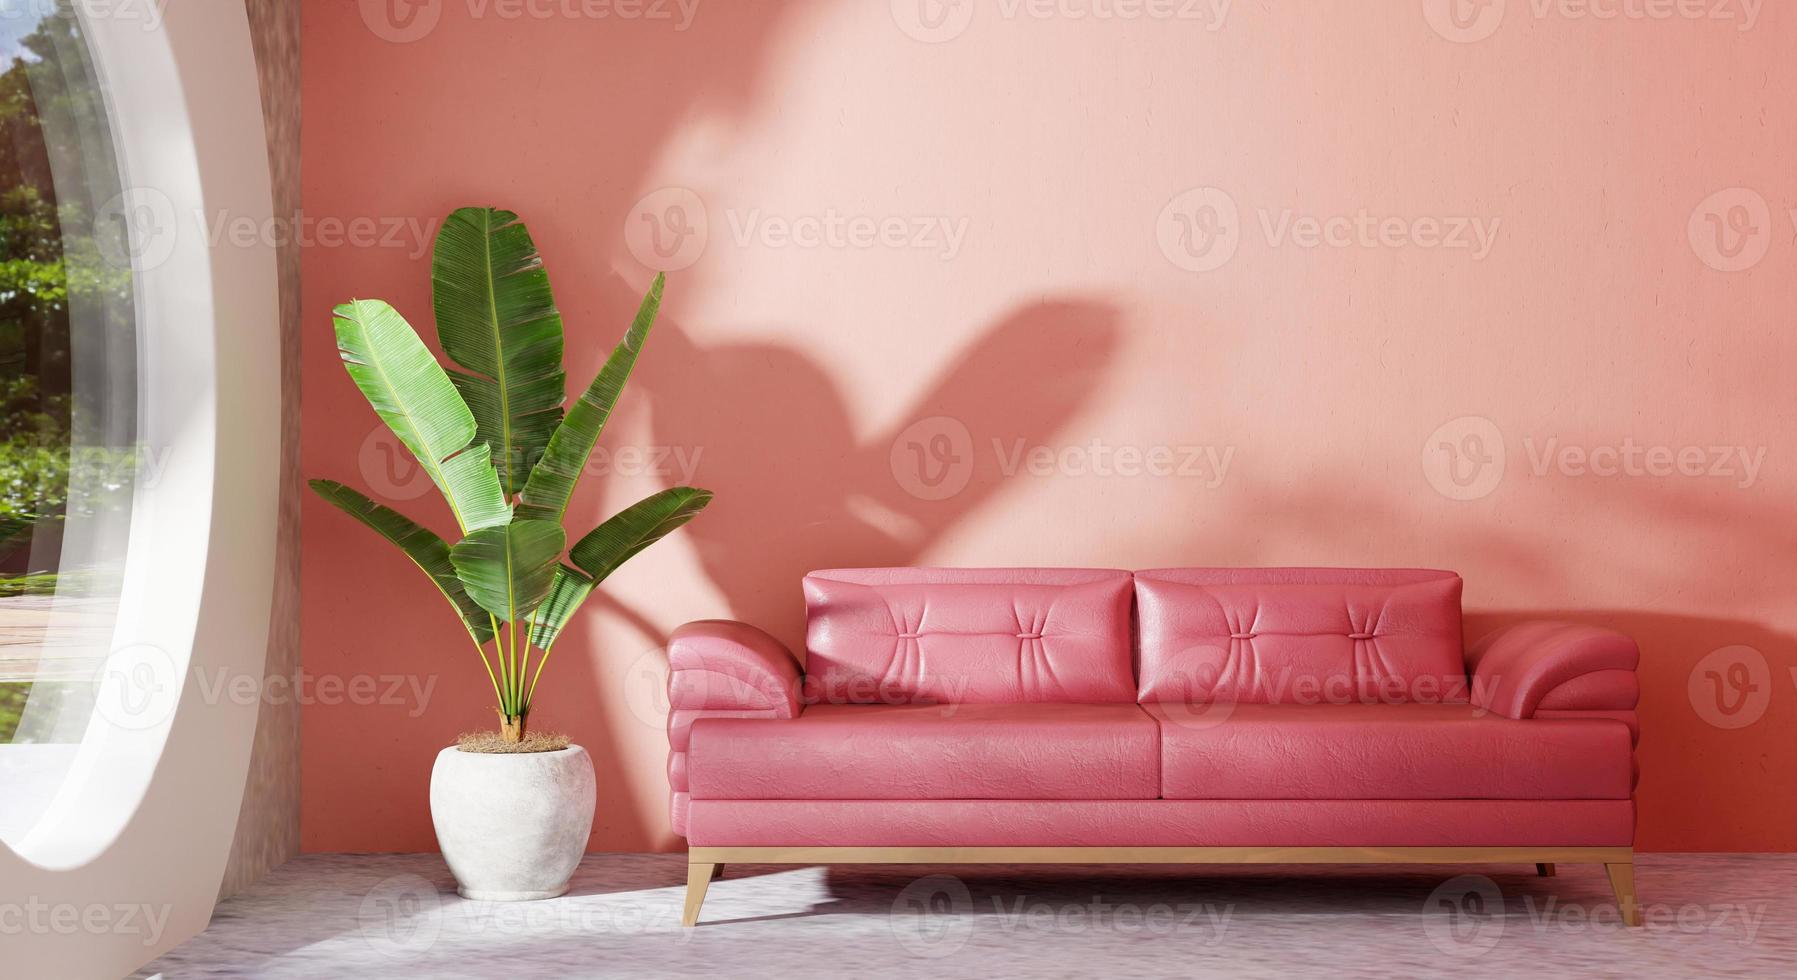 Cozy pastel pink sofa in modern living room with banana plant and look through glass window garden outside outdoor view on concrete floor. Architecture and interior concept. 3D illustration rendering photo